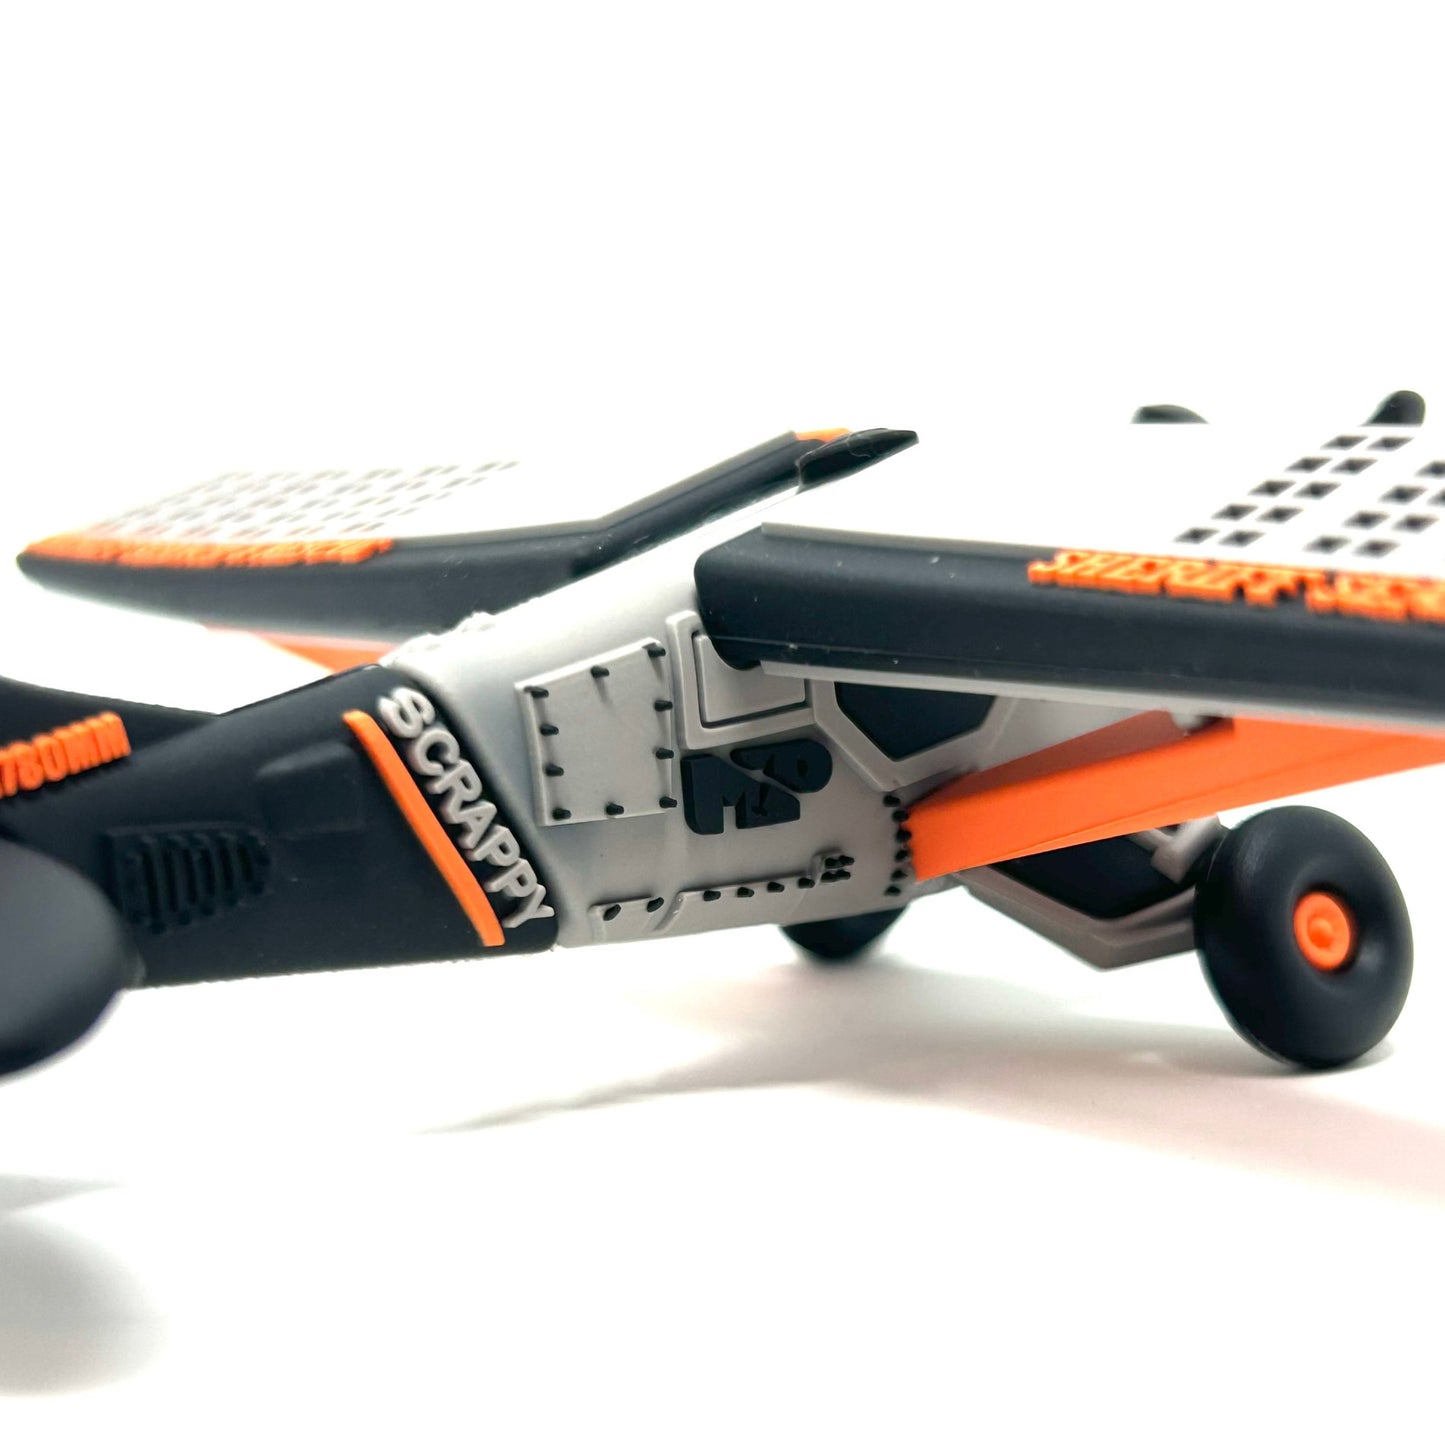 Scrappy Toy Plane or Christmas Ornament